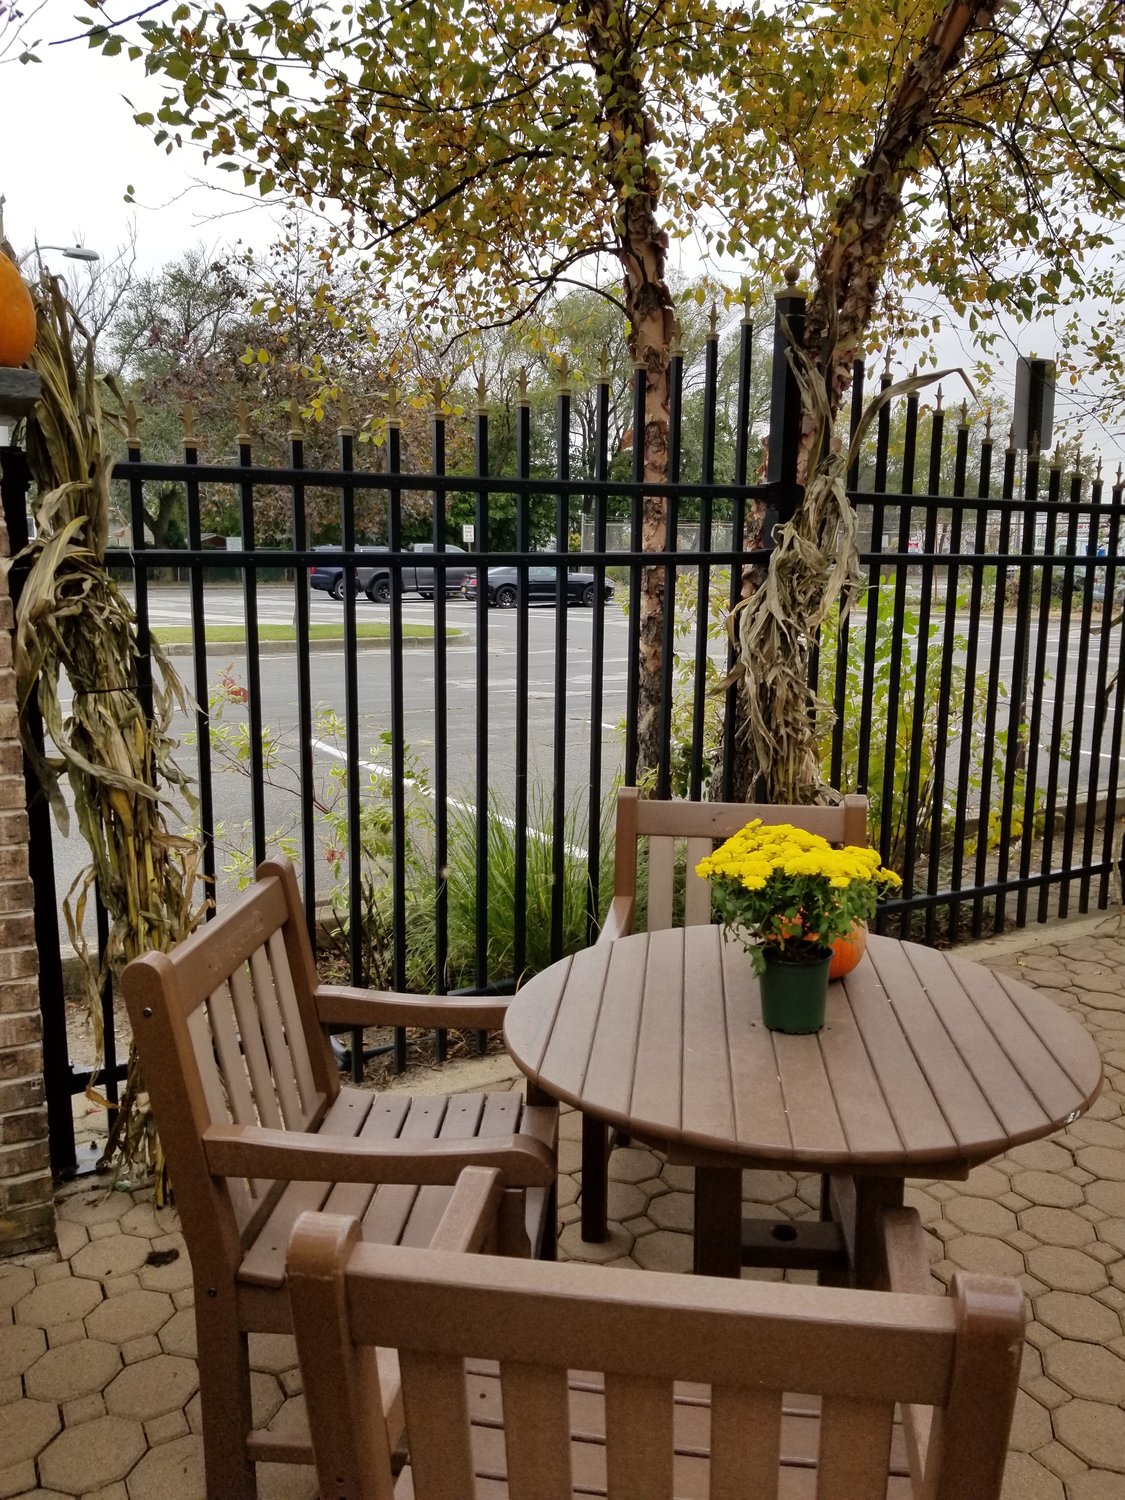 Lynbrook Library garden dedicated to late board president Herald